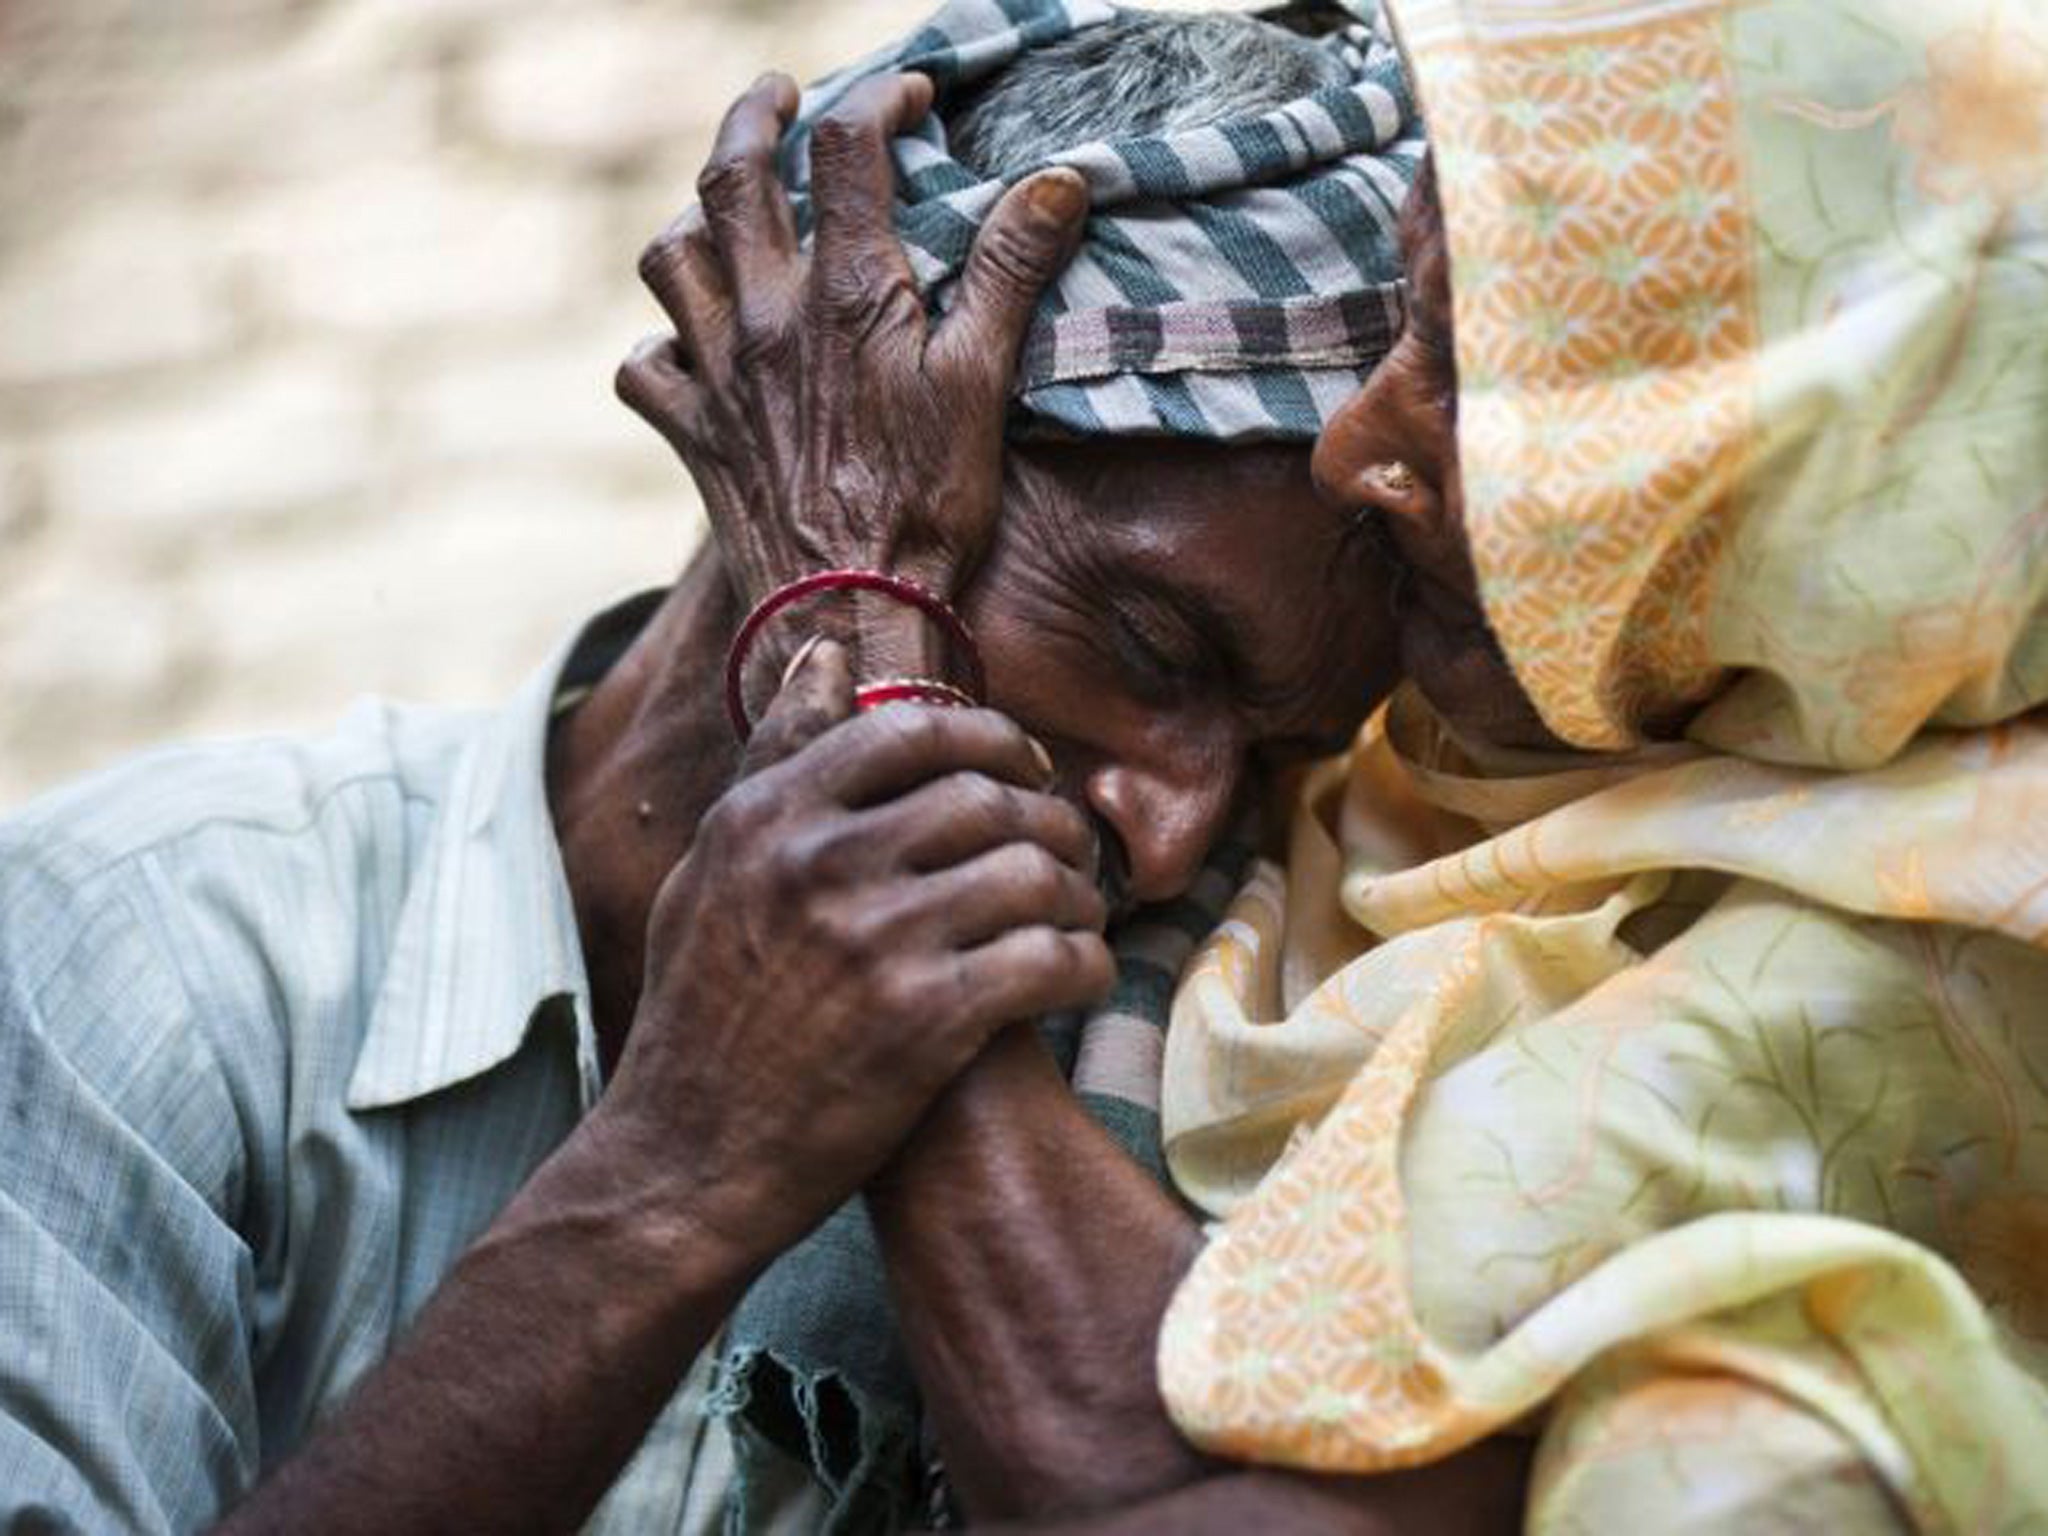 Sohan Lal, father and uncle of Murti and Pushpa, the two girls who were raped and hanged in Katra Sadatganj in Uttar Pradesh, is comforted by his mother 